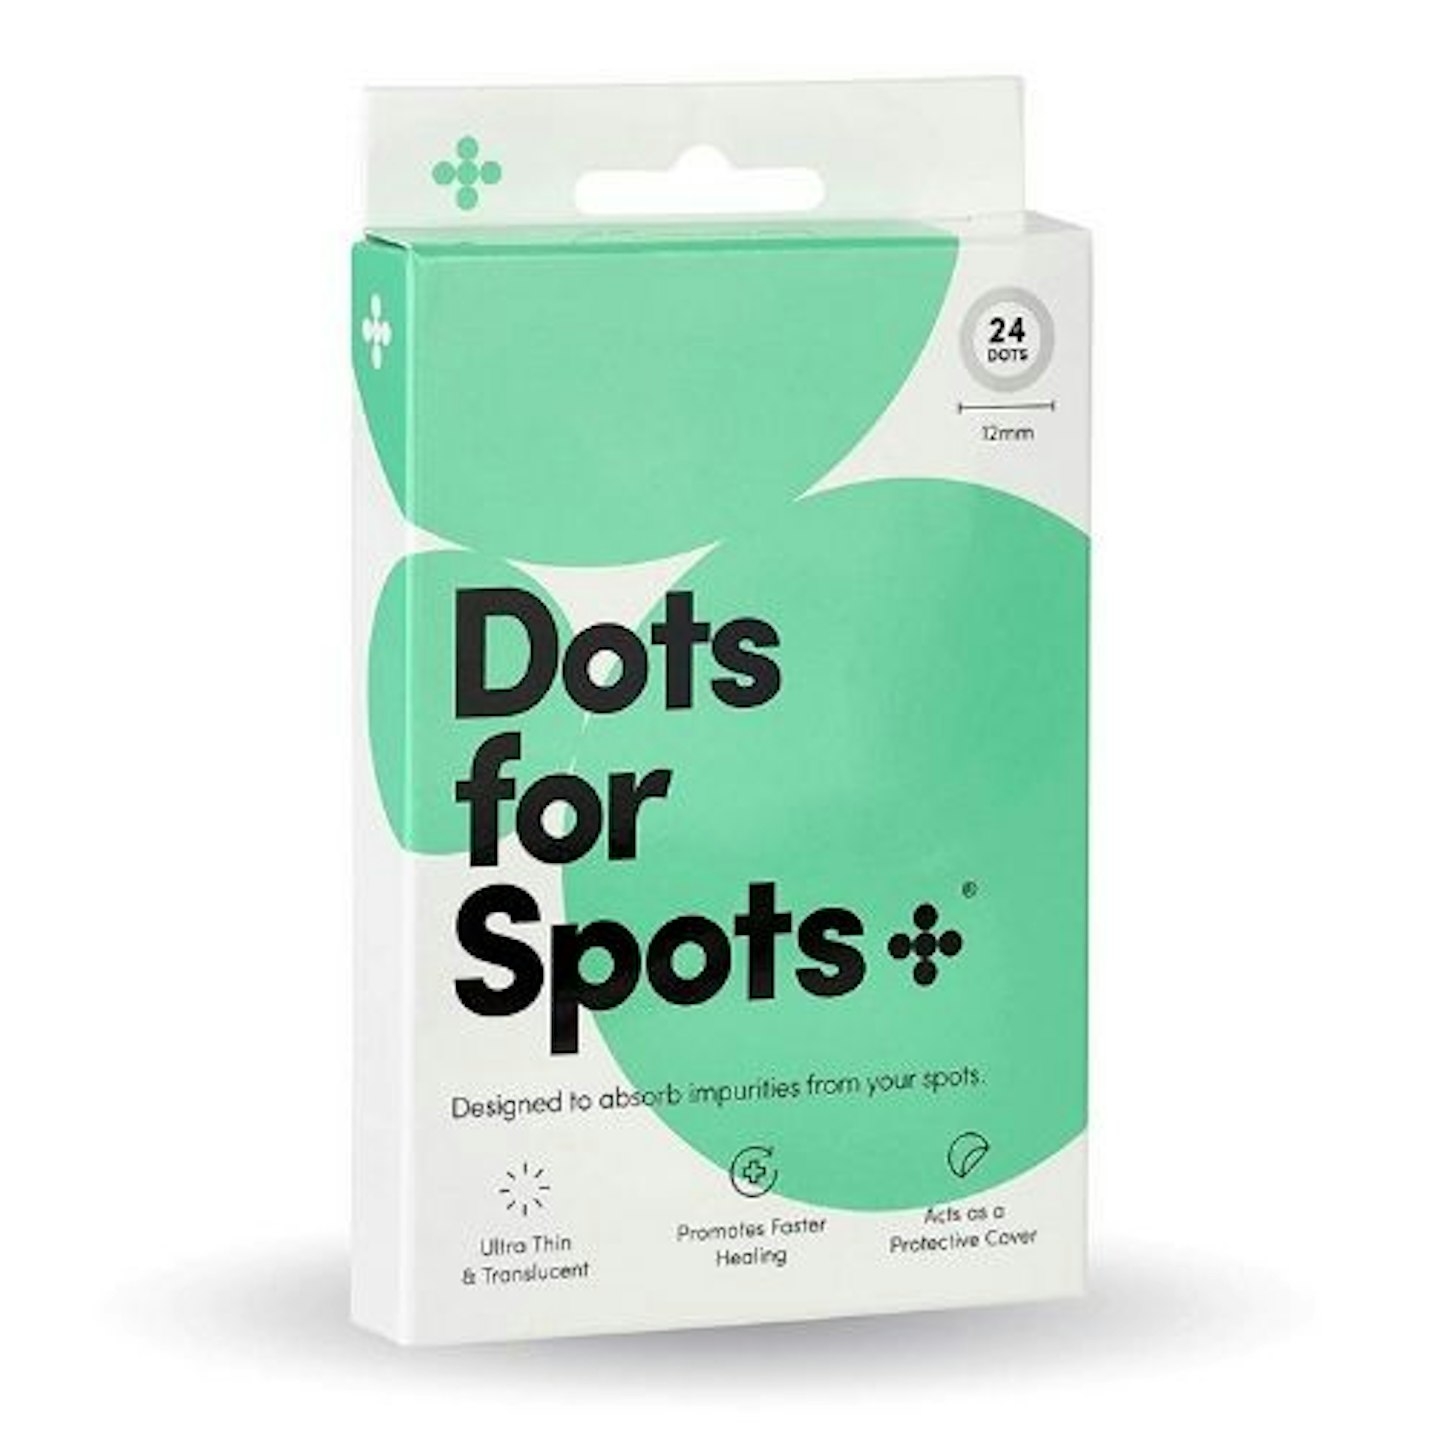 Dots for Spotsu00ae Original Acne Absorbing Patches